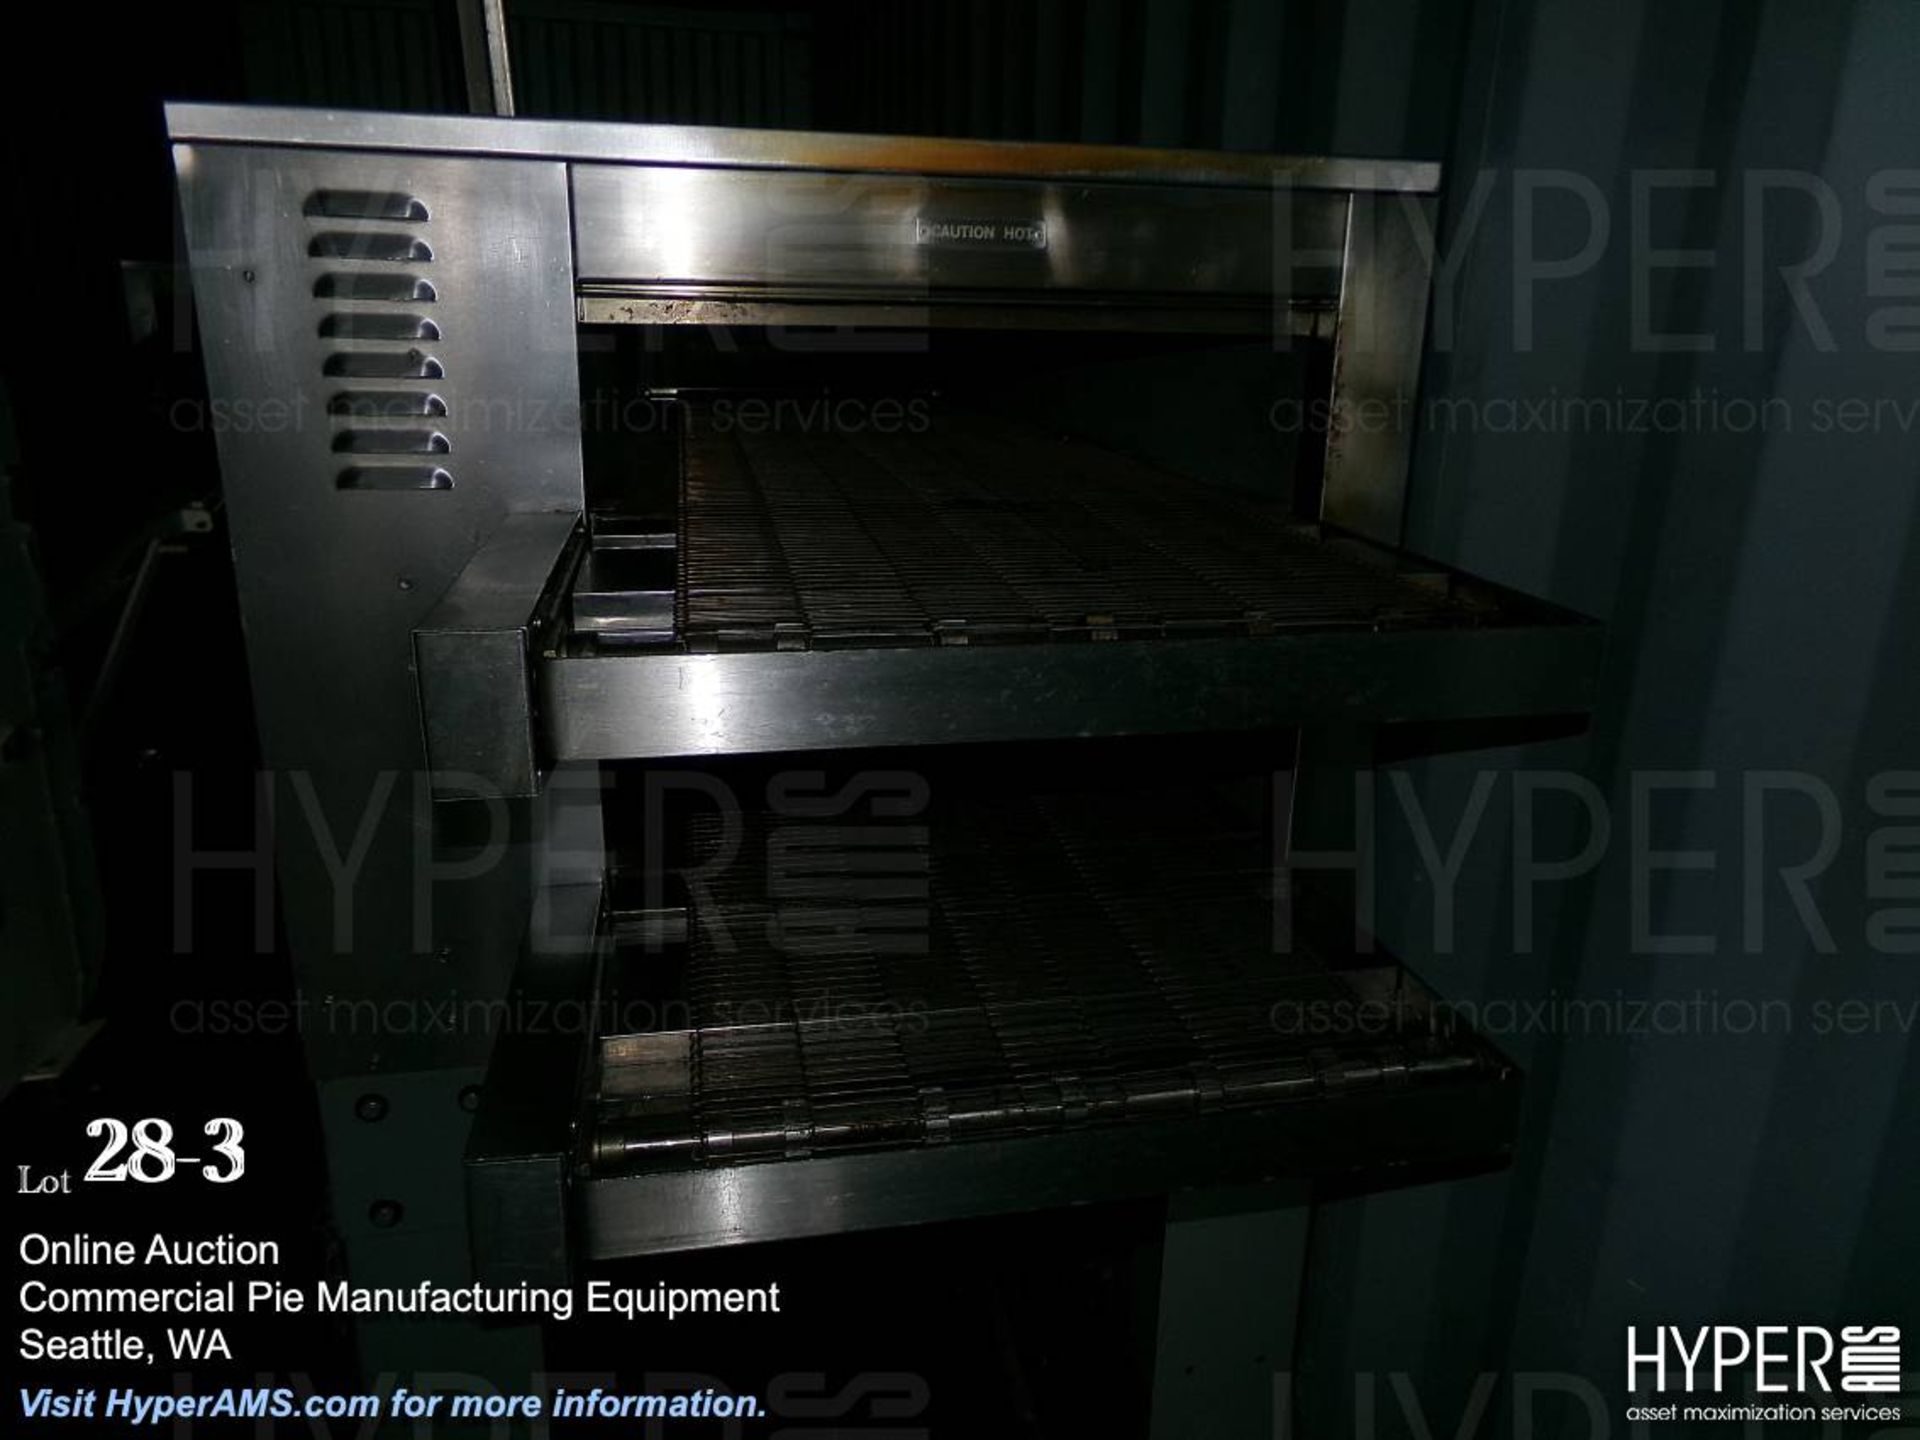 CTX Double Chamber Convection Oven Model DZ55 S/N 035710908 208V - Image 3 of 9